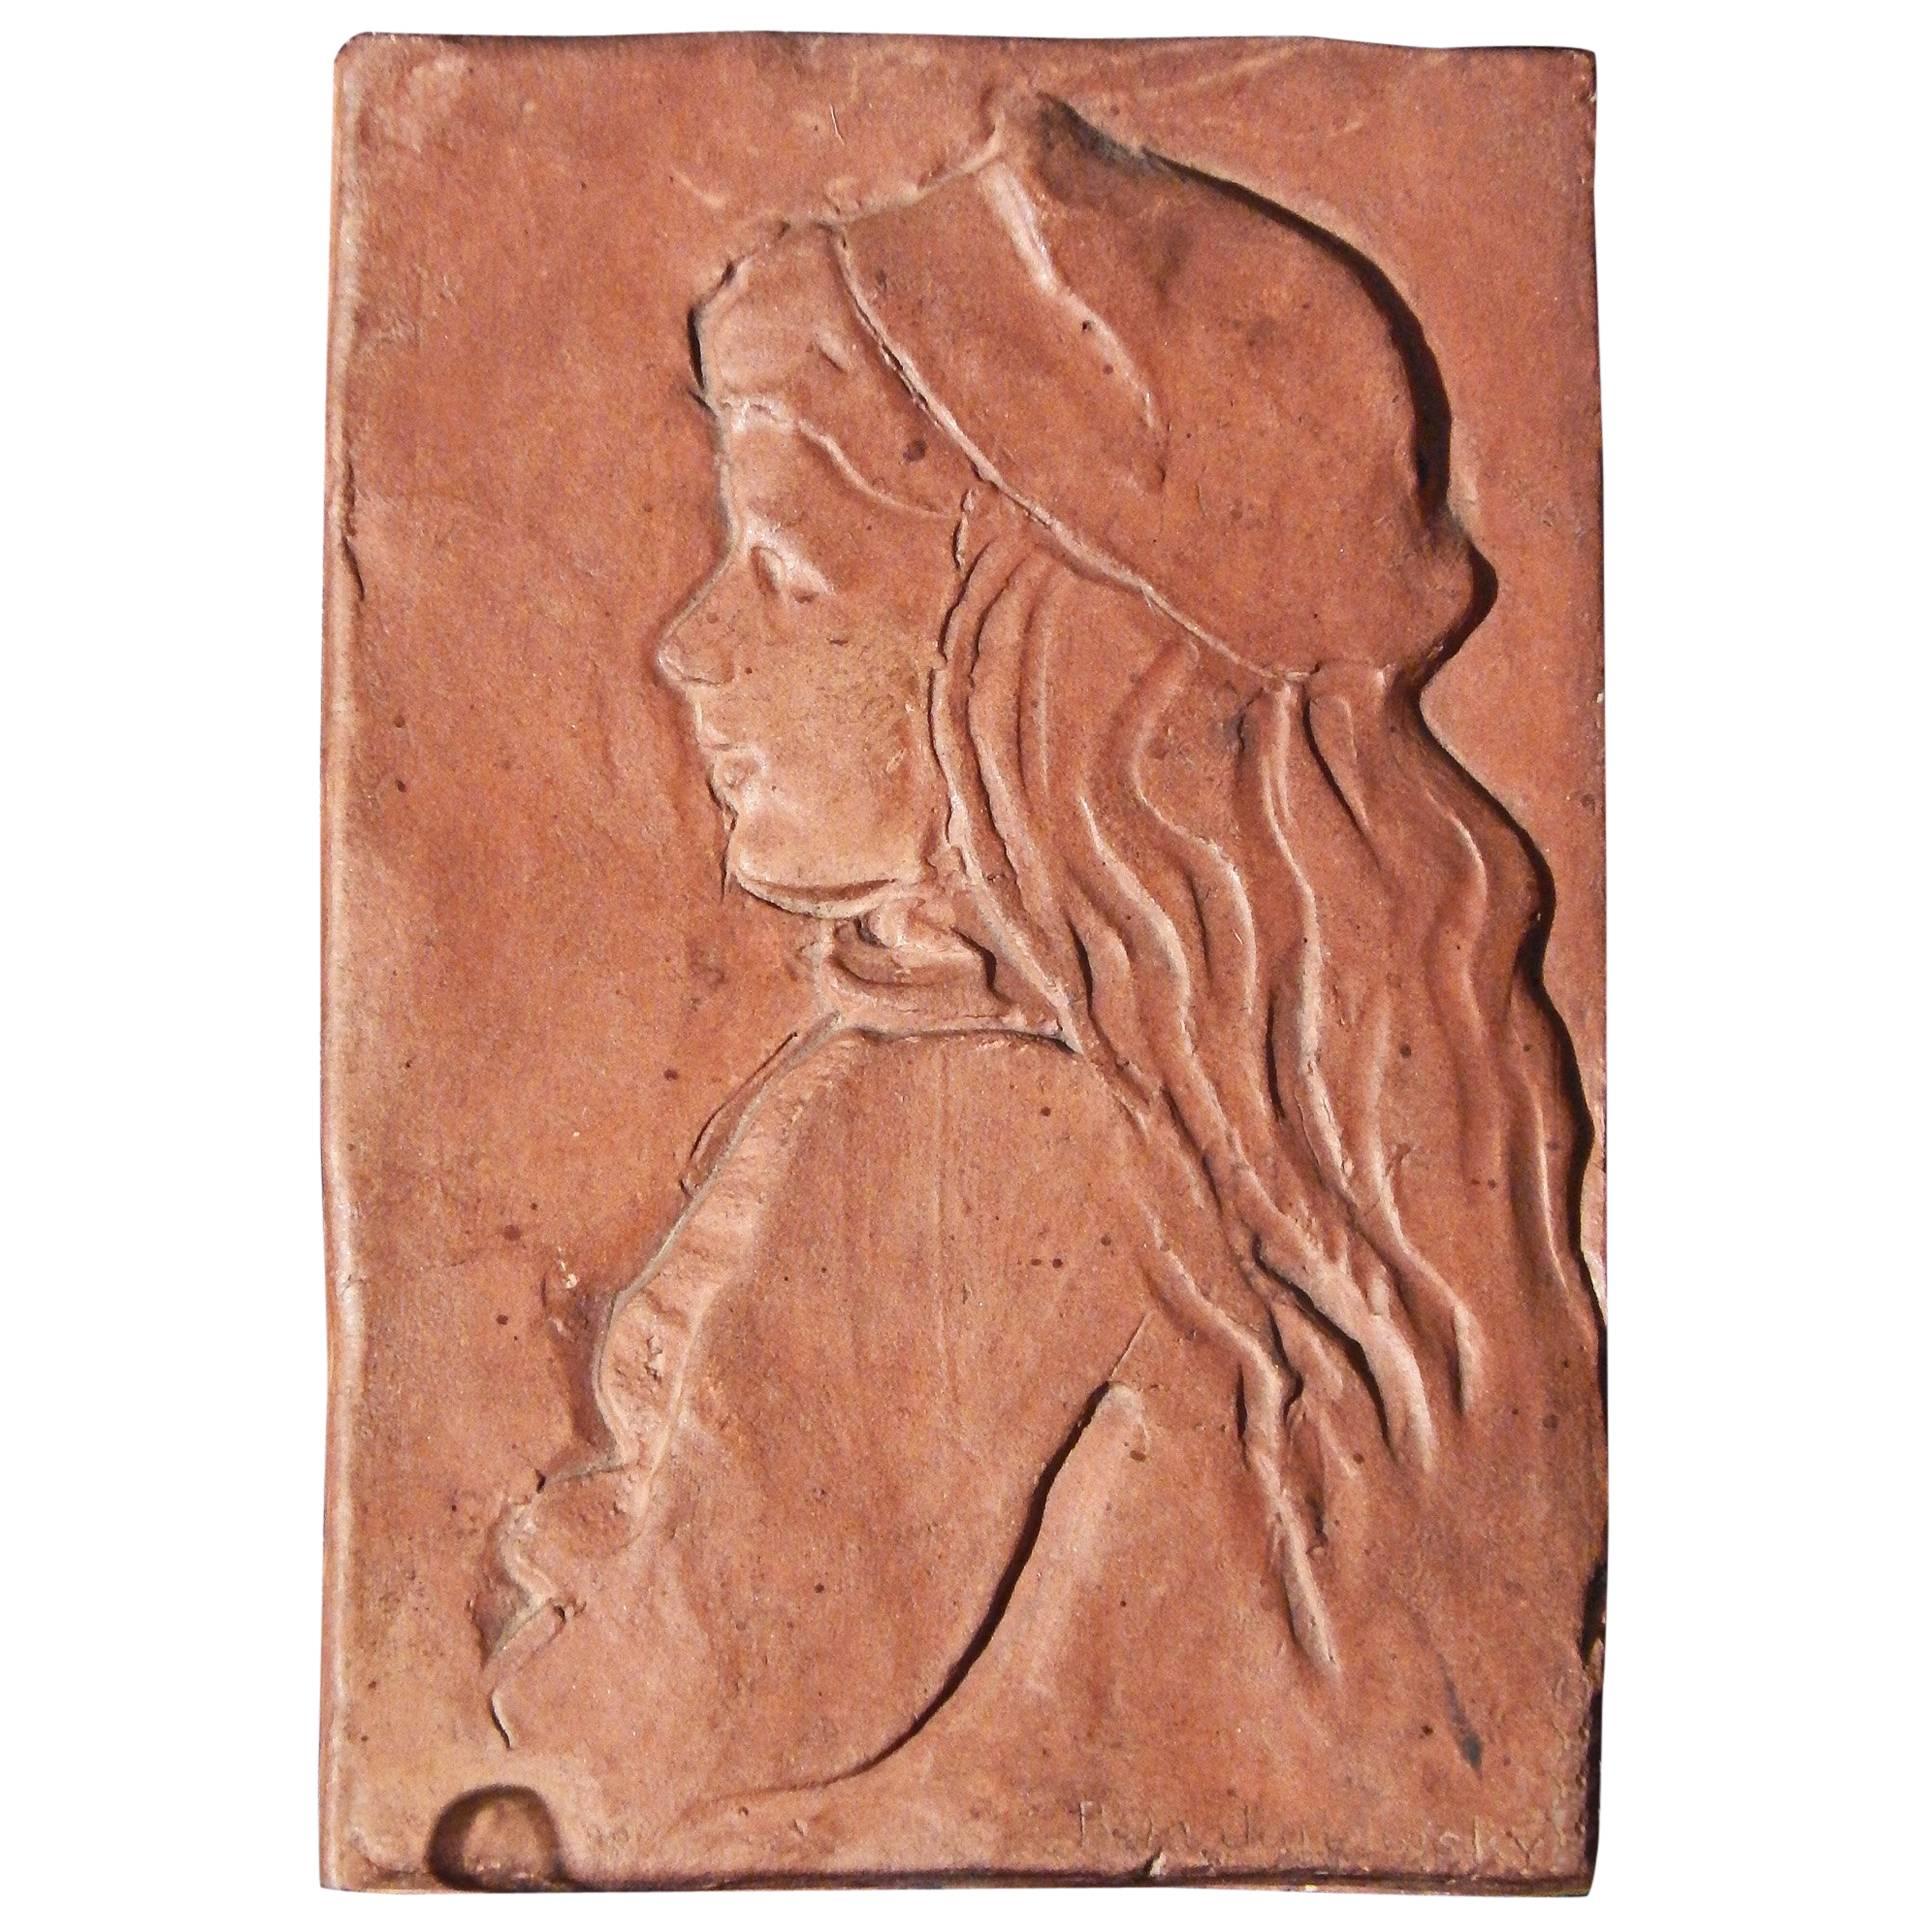 "Girl with Beret, " Lovely, Carved 1930s Sculptural Plaque by Bela Janowsky For Sale